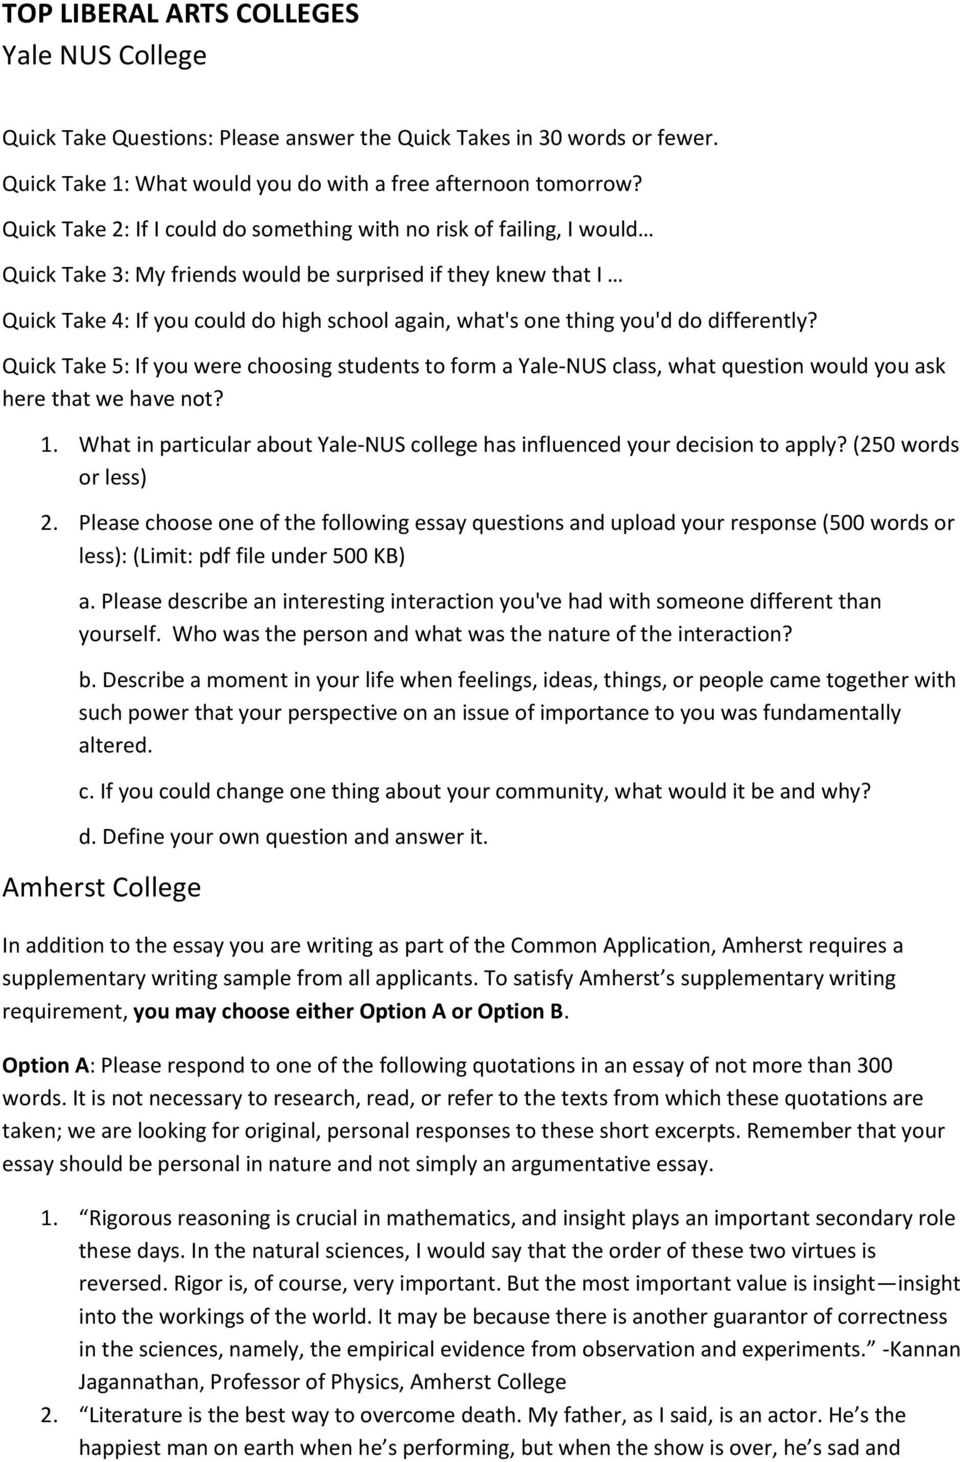 College Application Essay Examples Words Pdf Personal | Ceolpub In 500 Word Essay Template